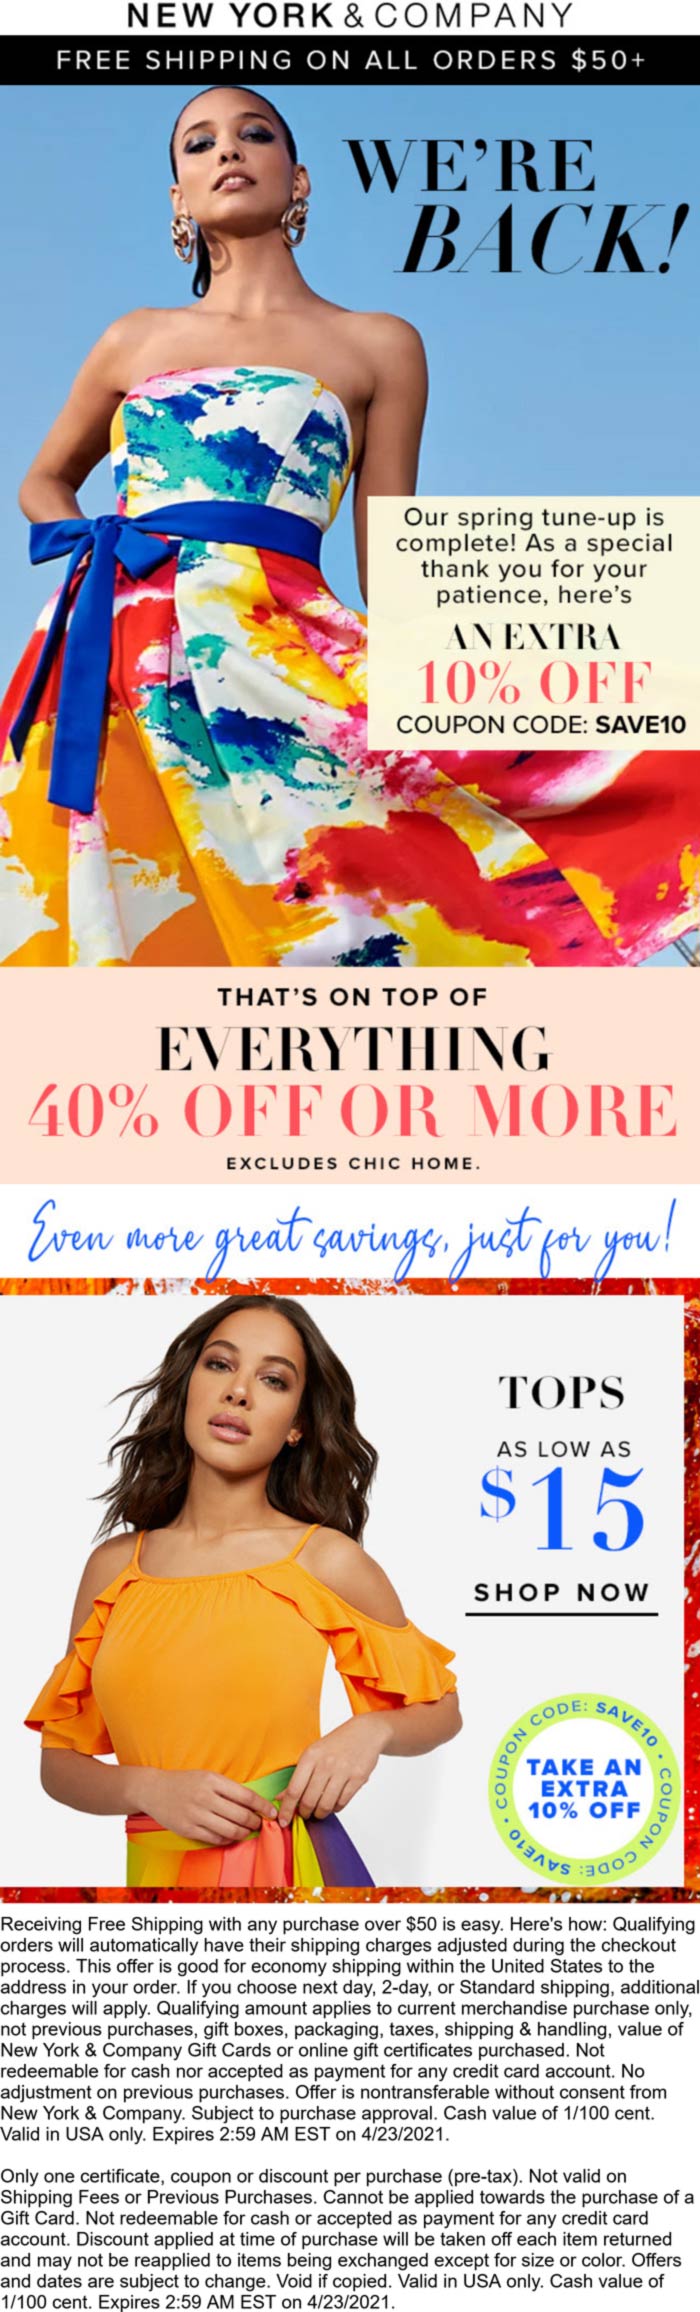 50 off everything today at New York & Company via promo code SAVE10 